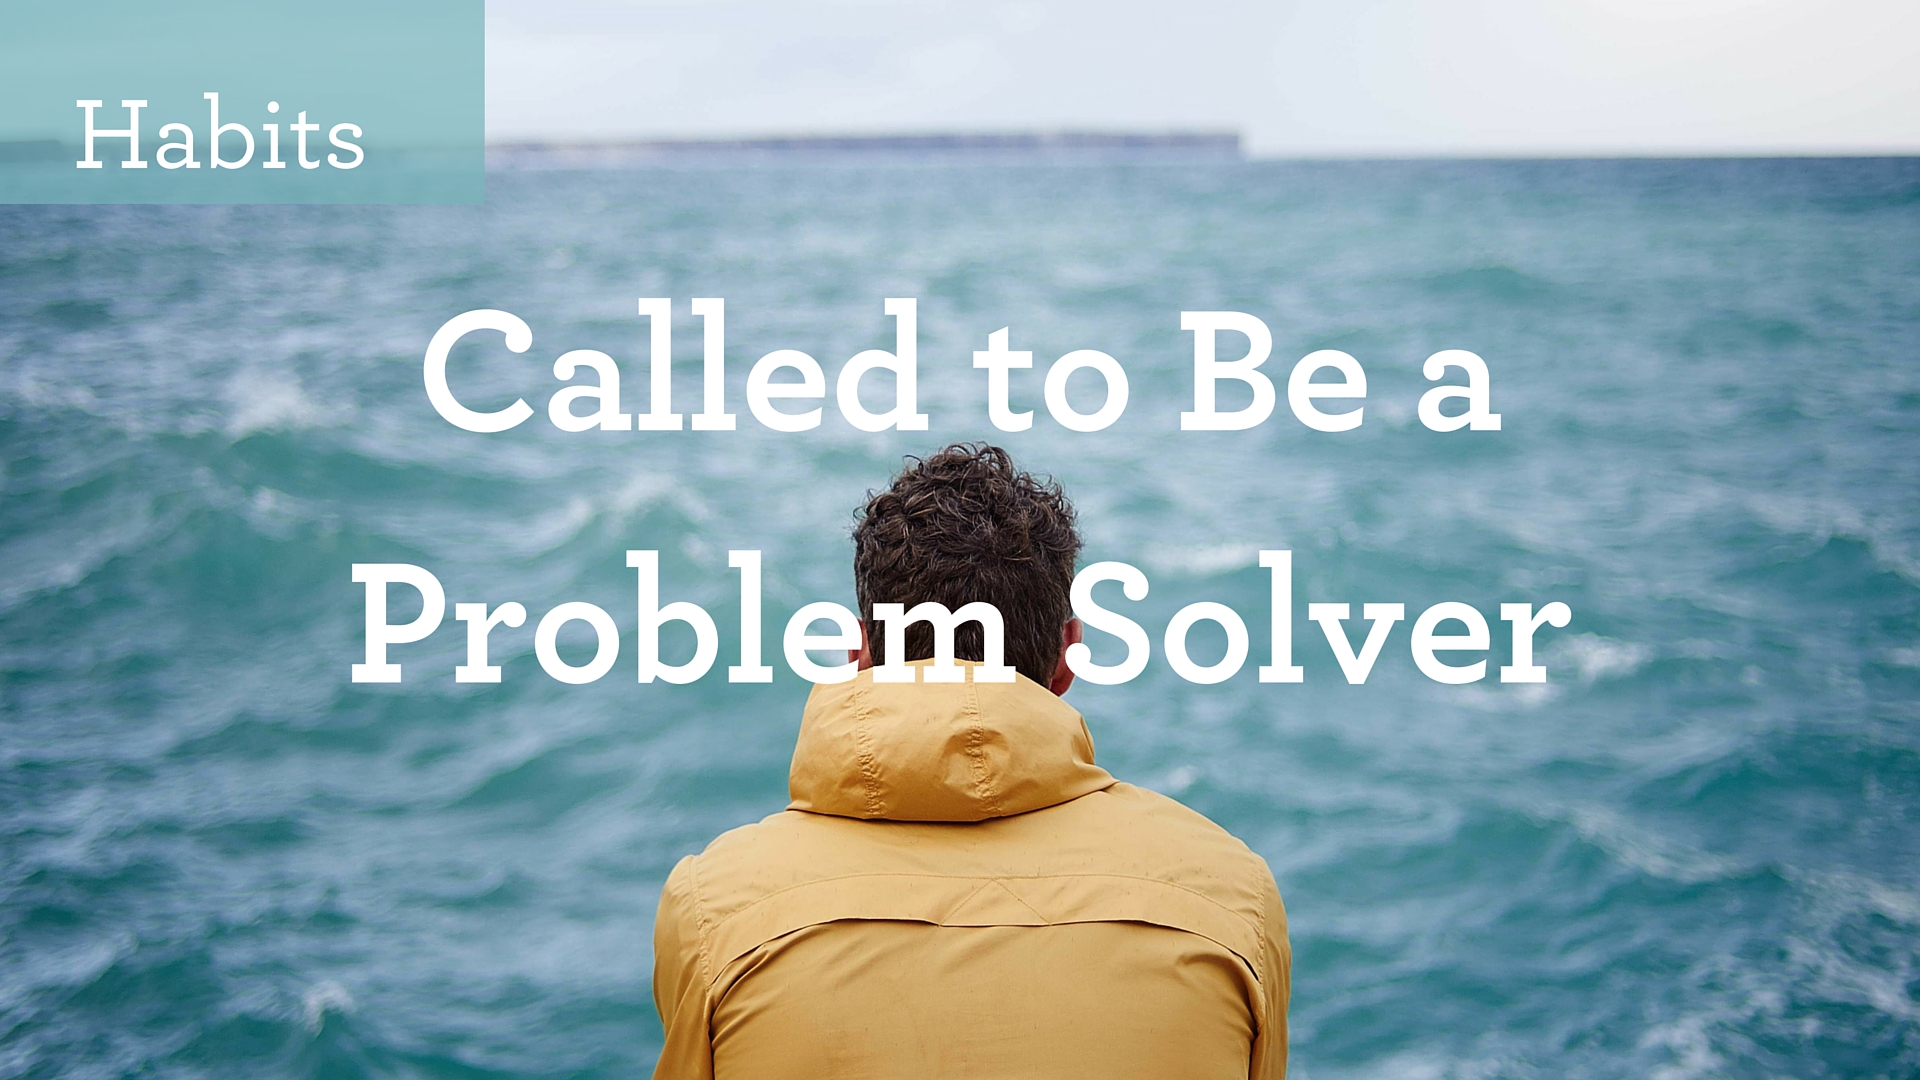 Are You a Problem Solver?